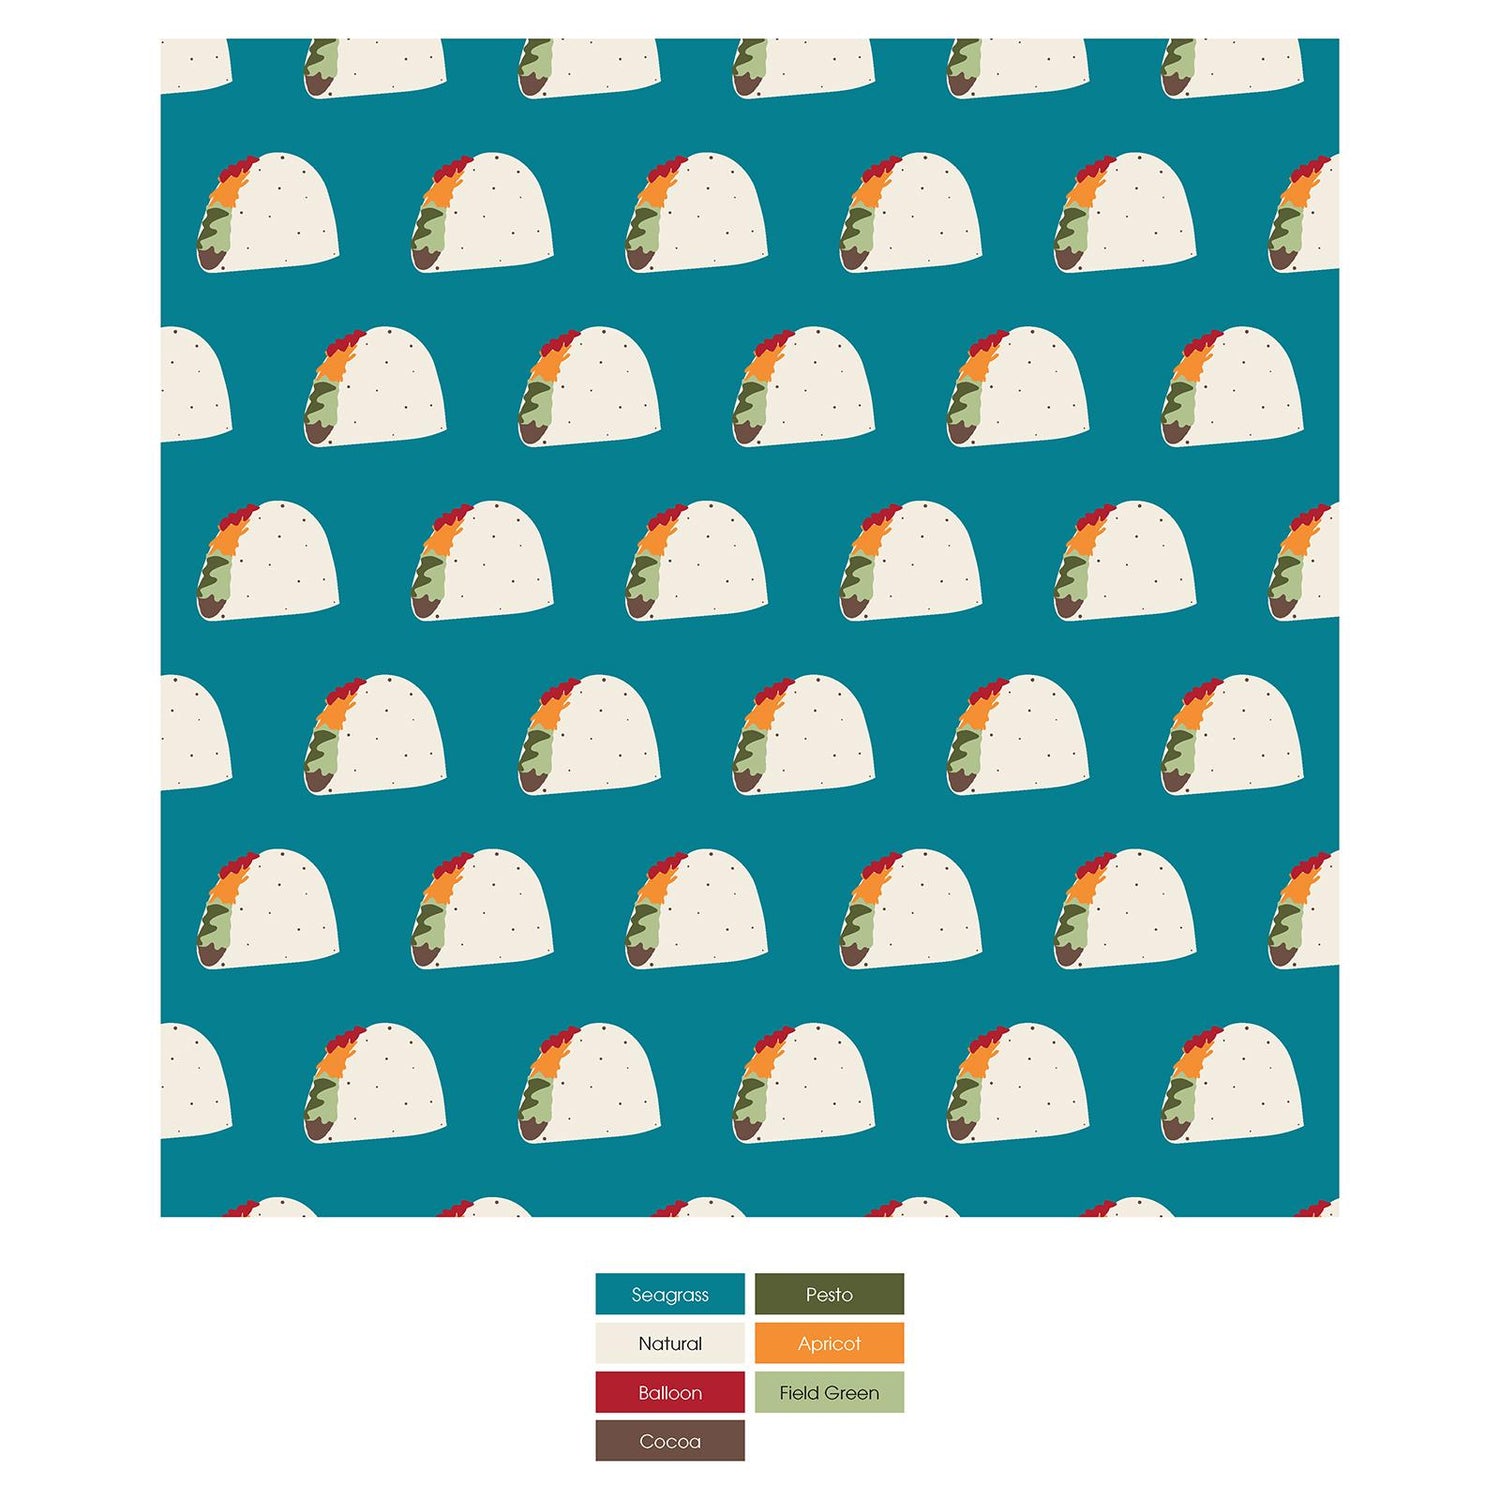 Print Swaddling Blanket in Seagrass Tacos